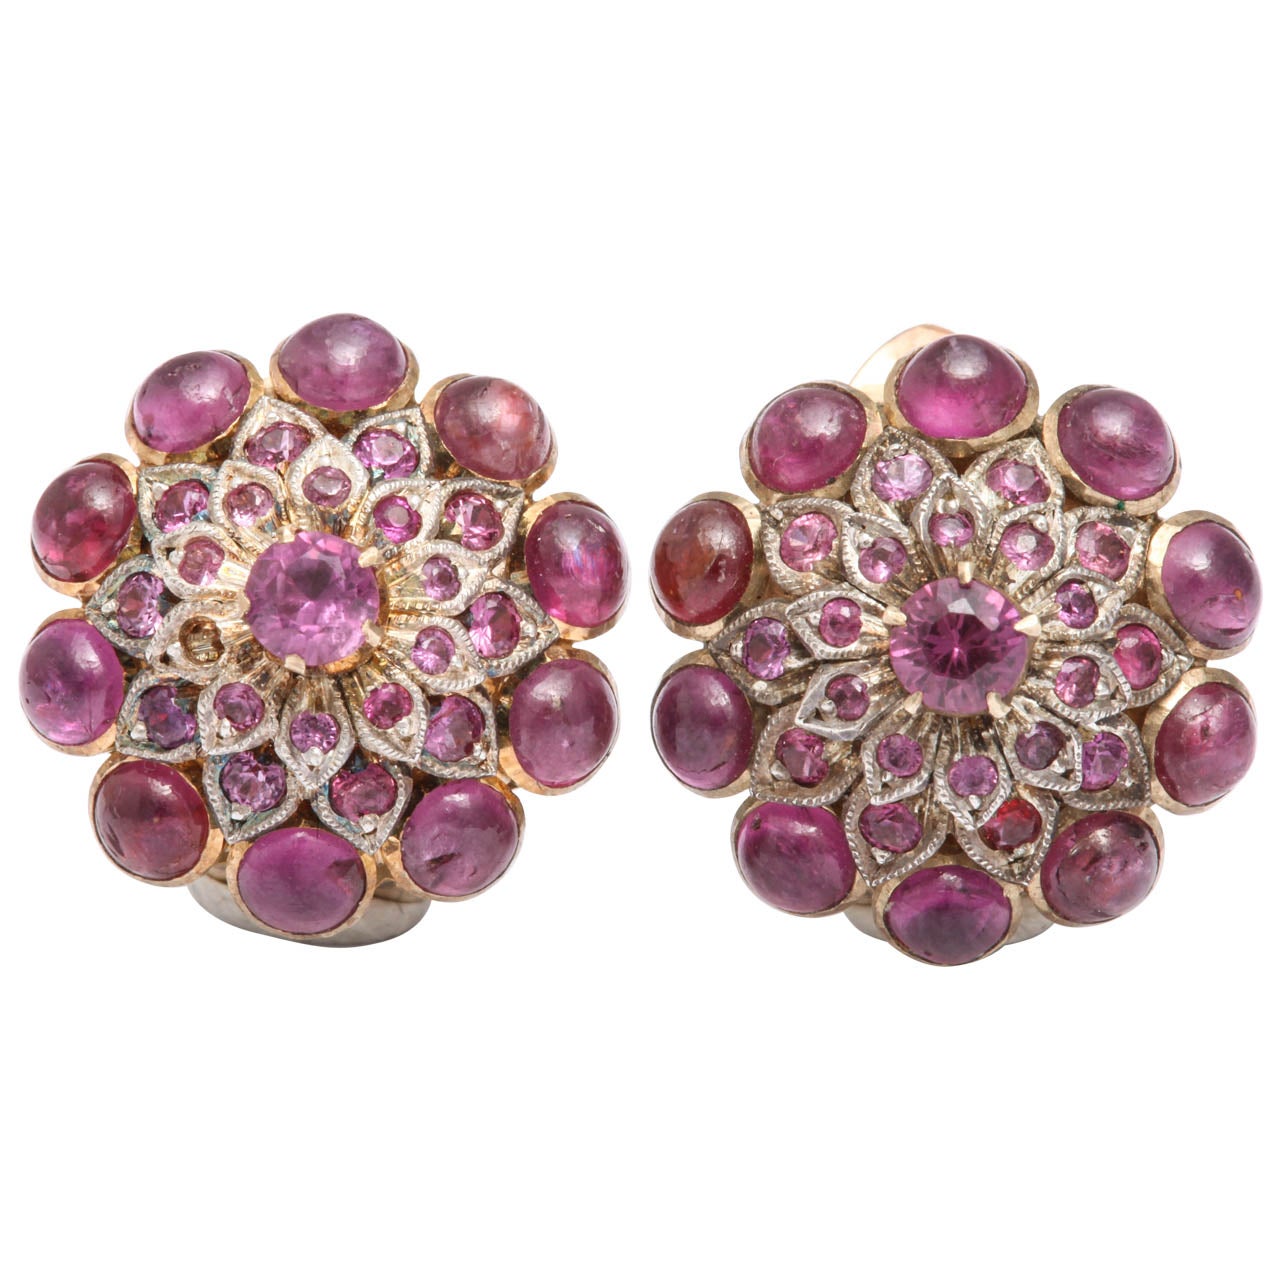 1940s Cabochon Ruby And Faceted Rubies Earclips